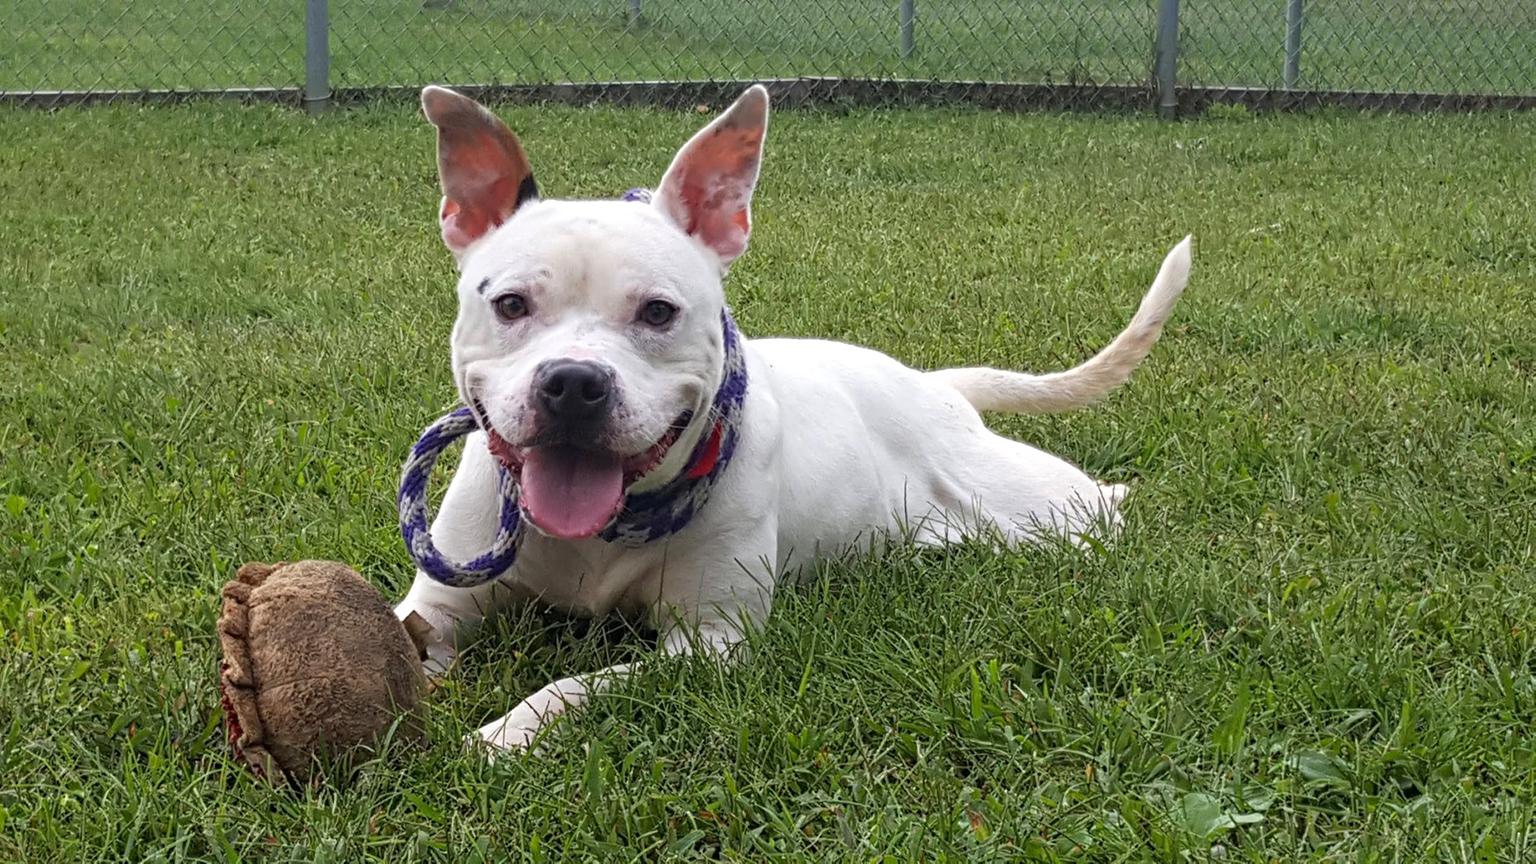 Copa is a 1-year-old male dog available for adoption through Chicago's city-run animal shelter (Chicago Animal Care and Control)